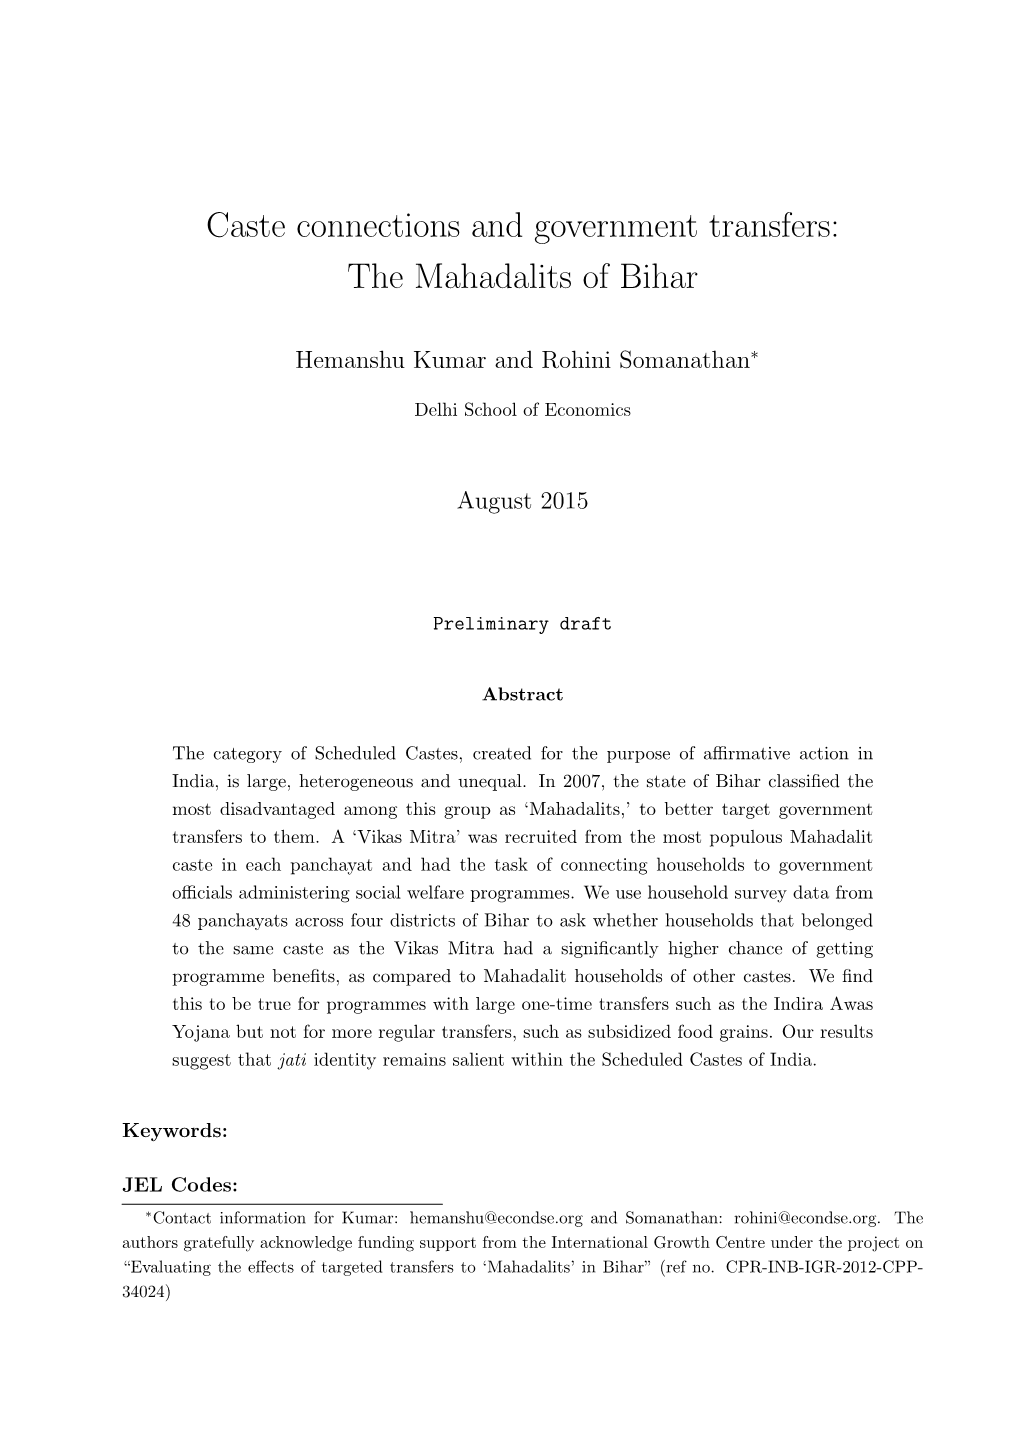 Caste Connections and Government Transfers: the Mahadalits of Bihar